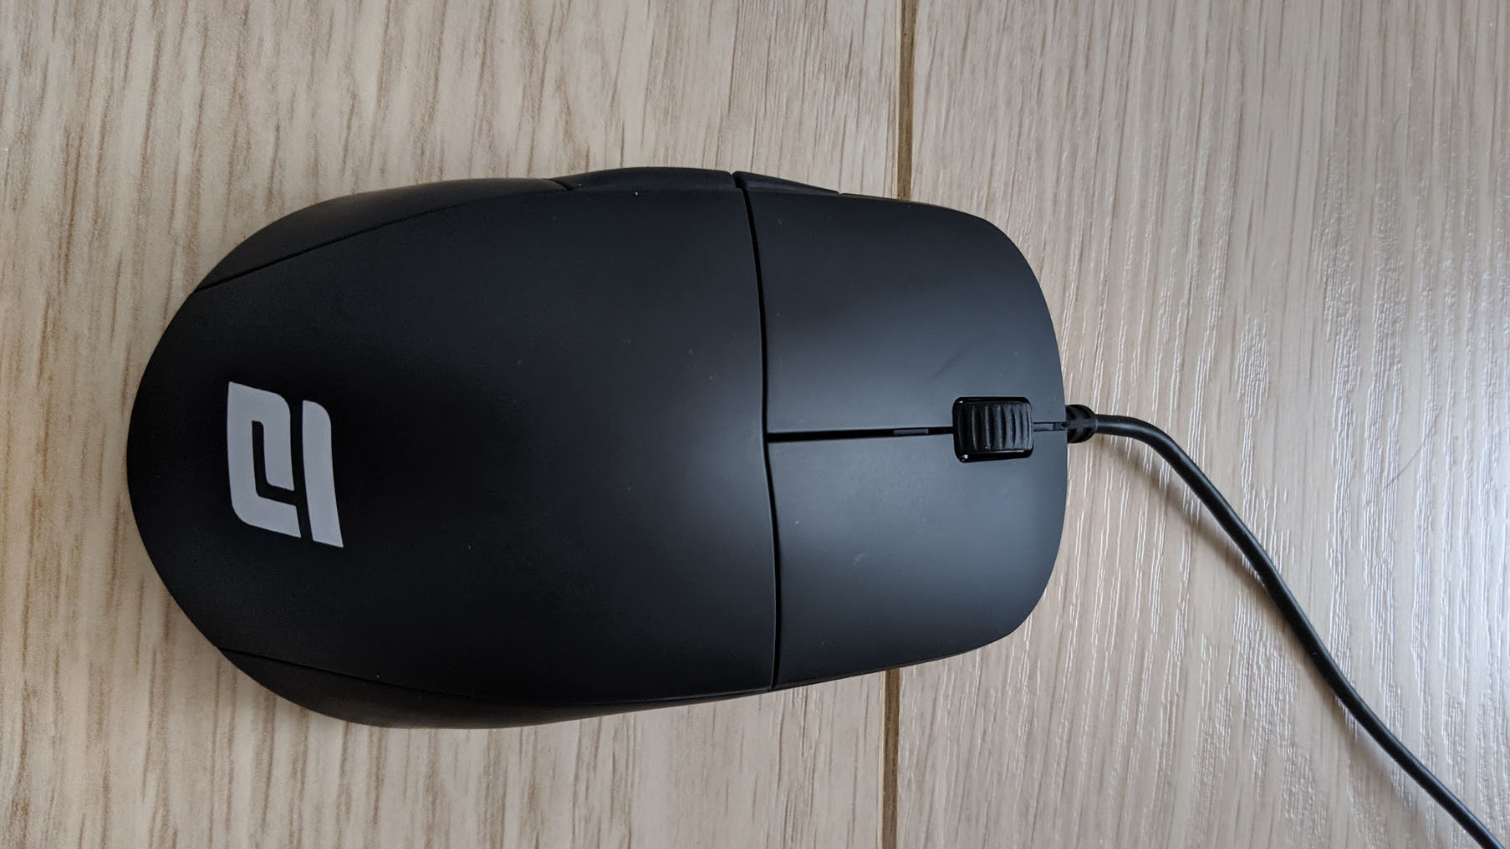 Endgame Gear Xm1 Gaming Mouse Review High Performance Simplicity Tom S Hardware Tom S Hardware